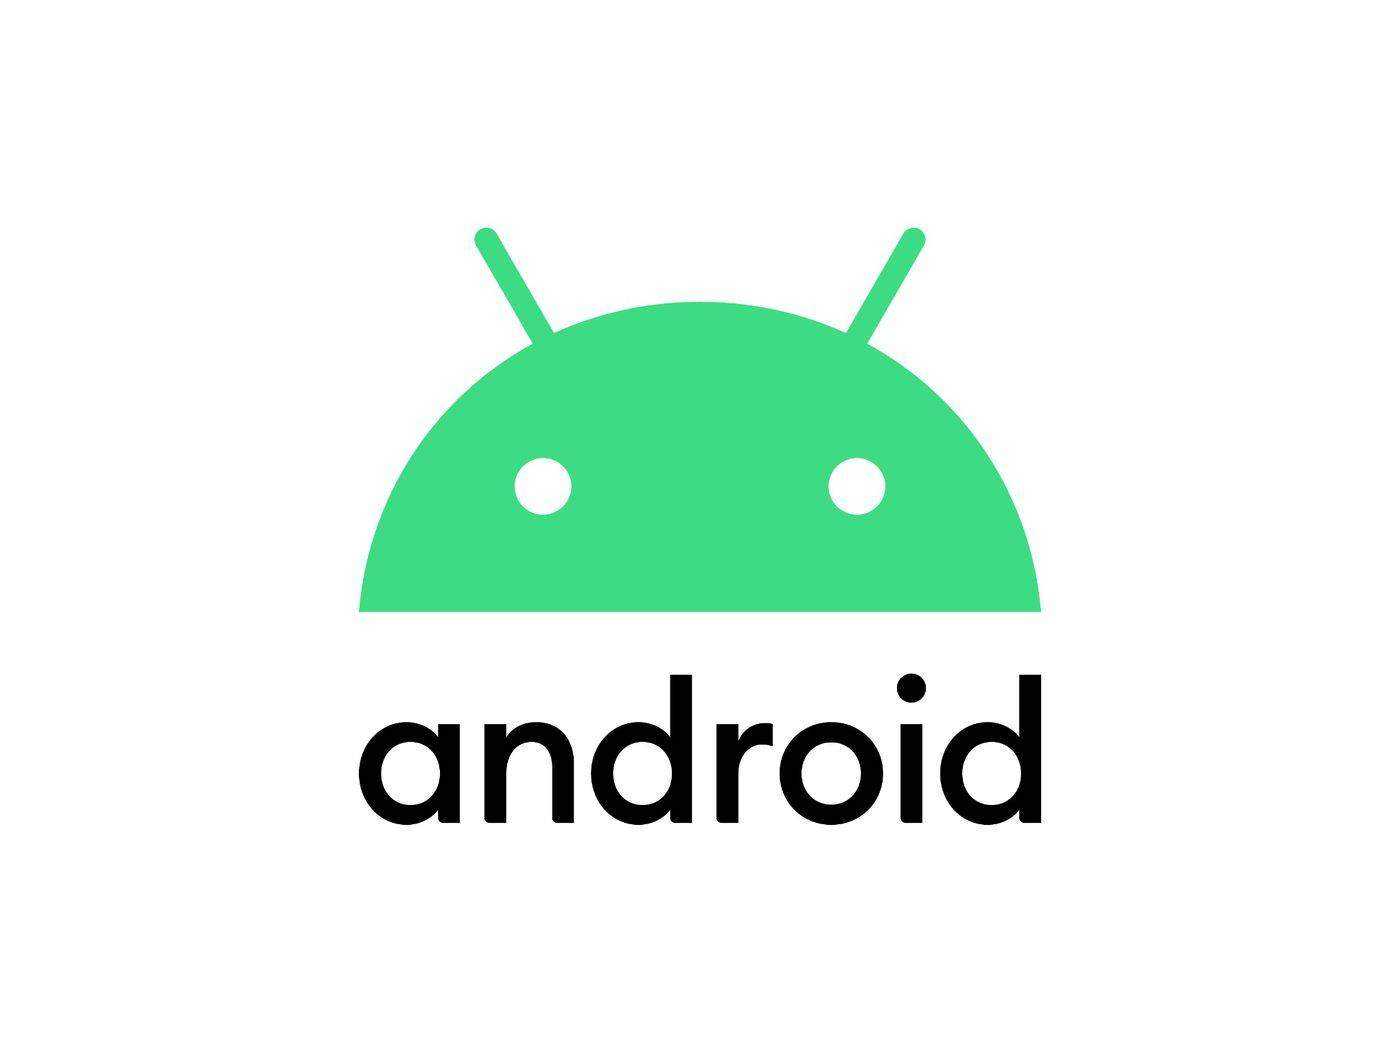 Android_logo_stacked__RGB_.jpg